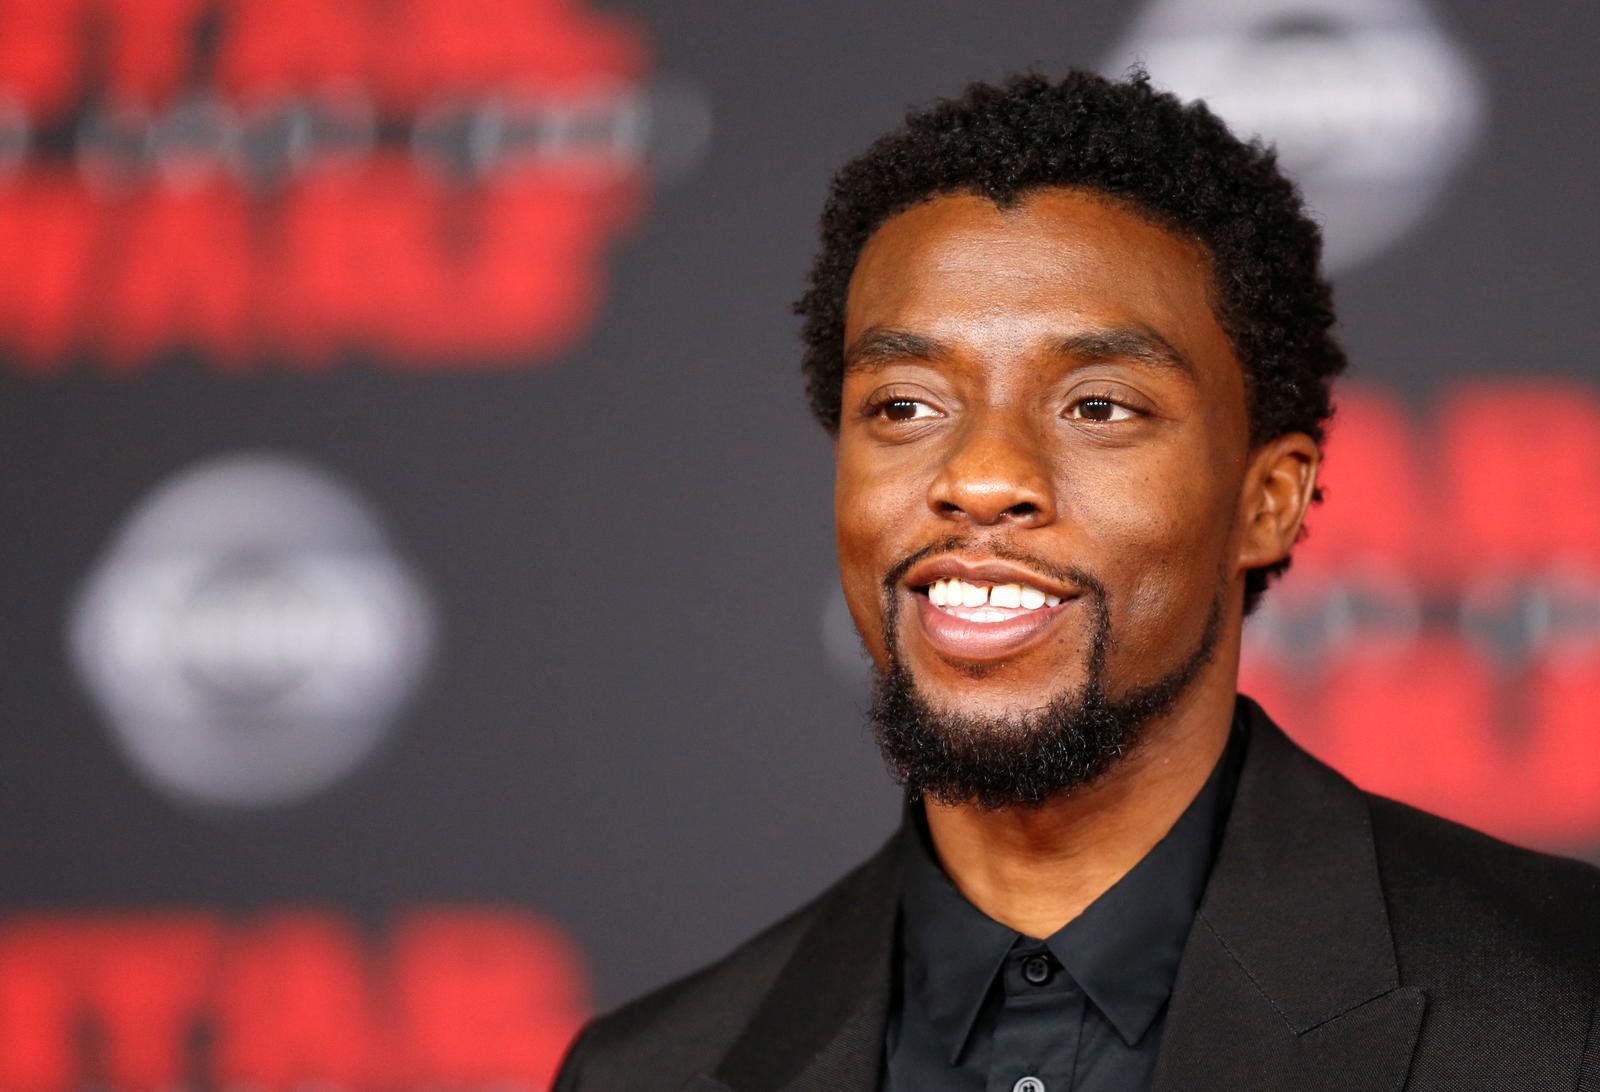 'Black Panther' film star Chadwick Boseman dead at 43, after cancer battle